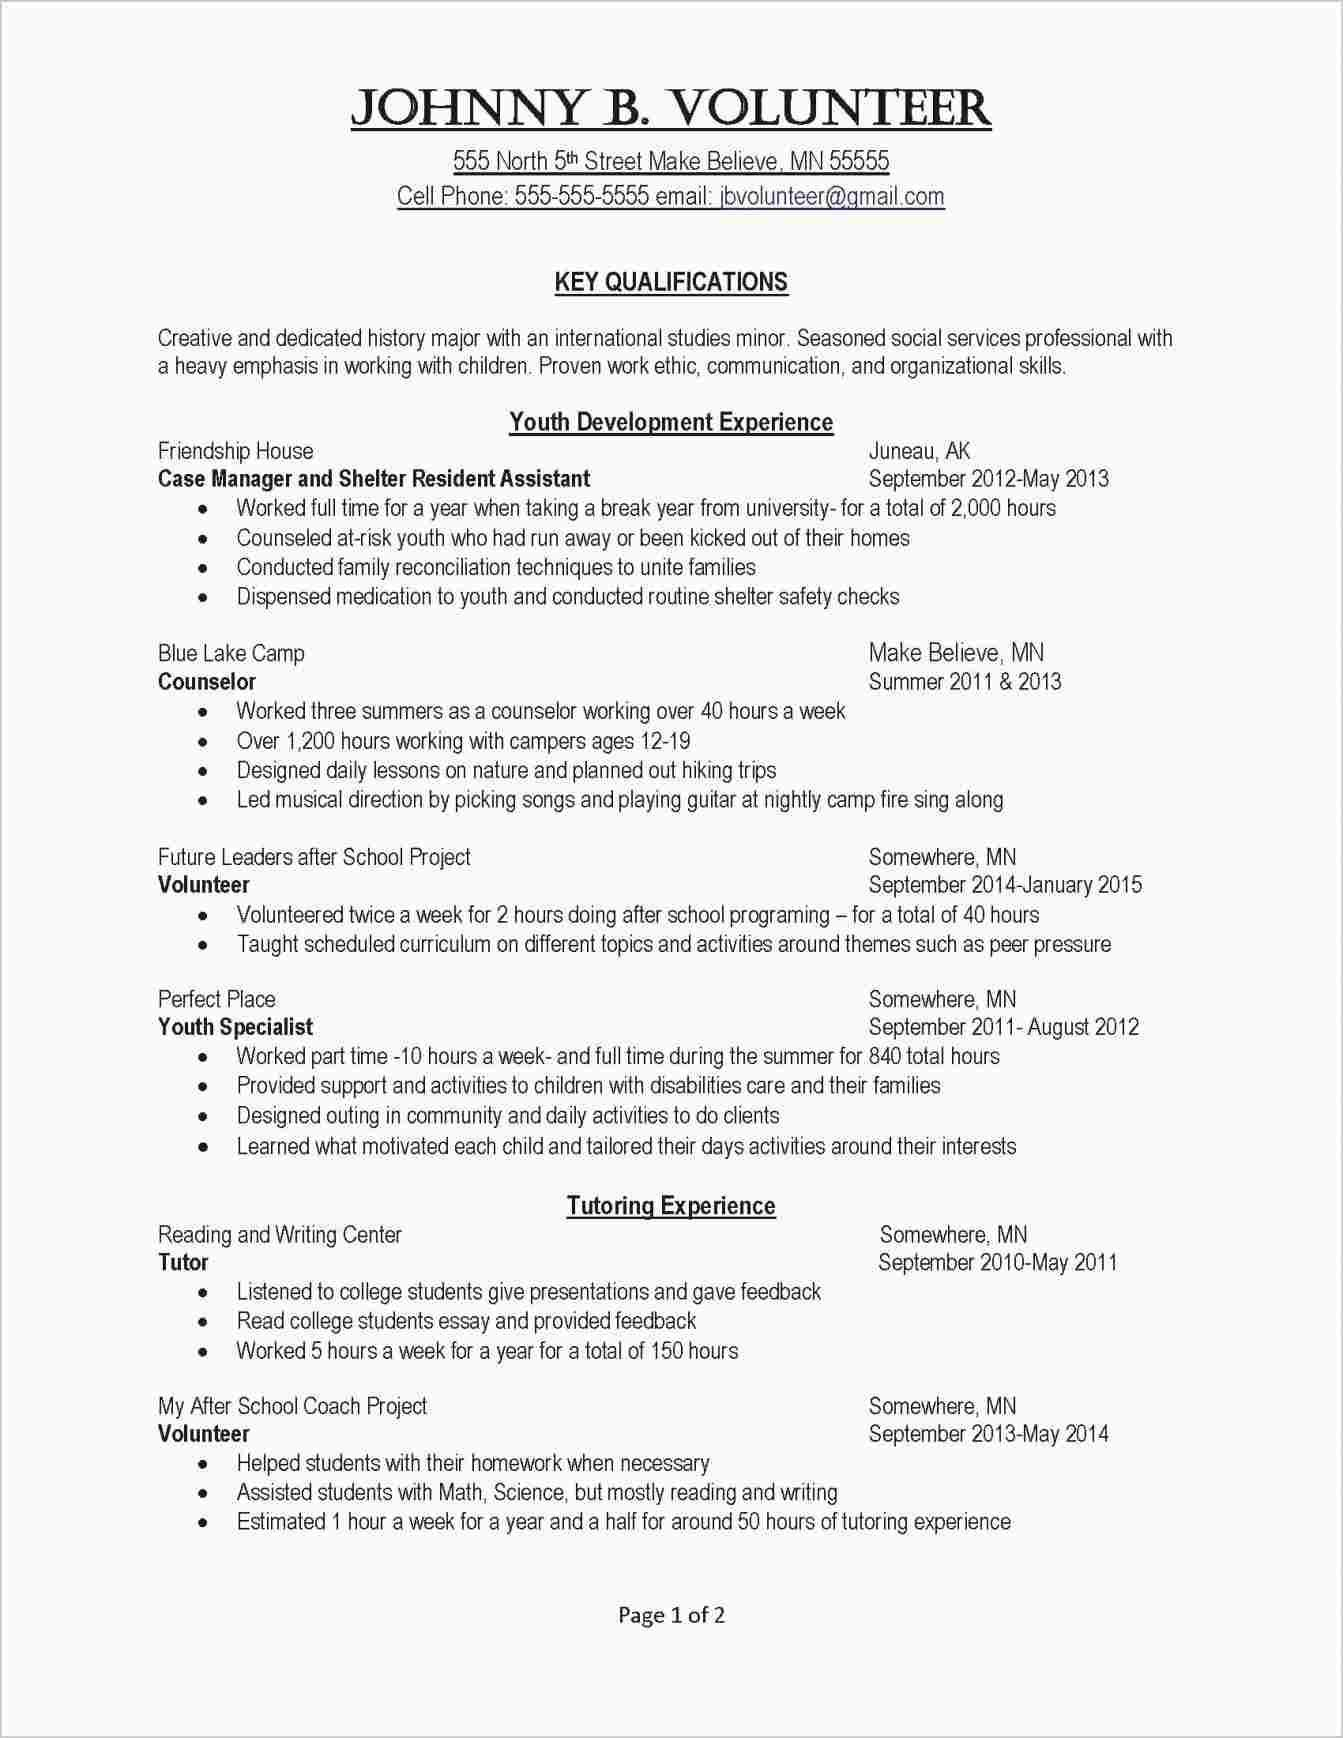 Cv Template For 16 Year Old With No Work Experience ...